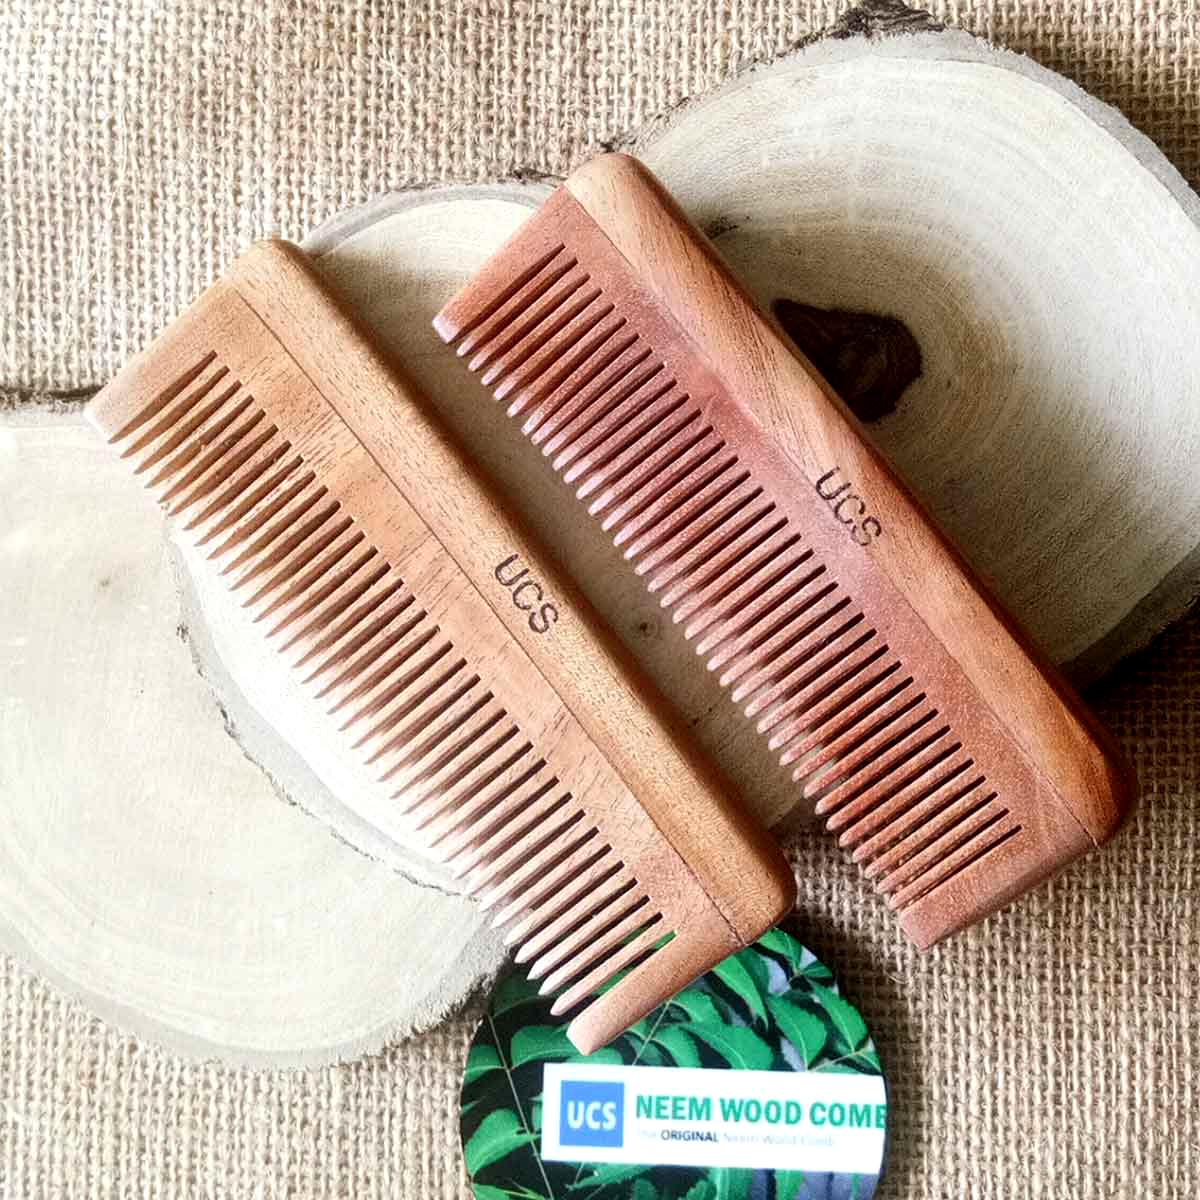 UCS Baby Comb Made of Neem Wood Set of 2 Baby Combs (UCS1018)